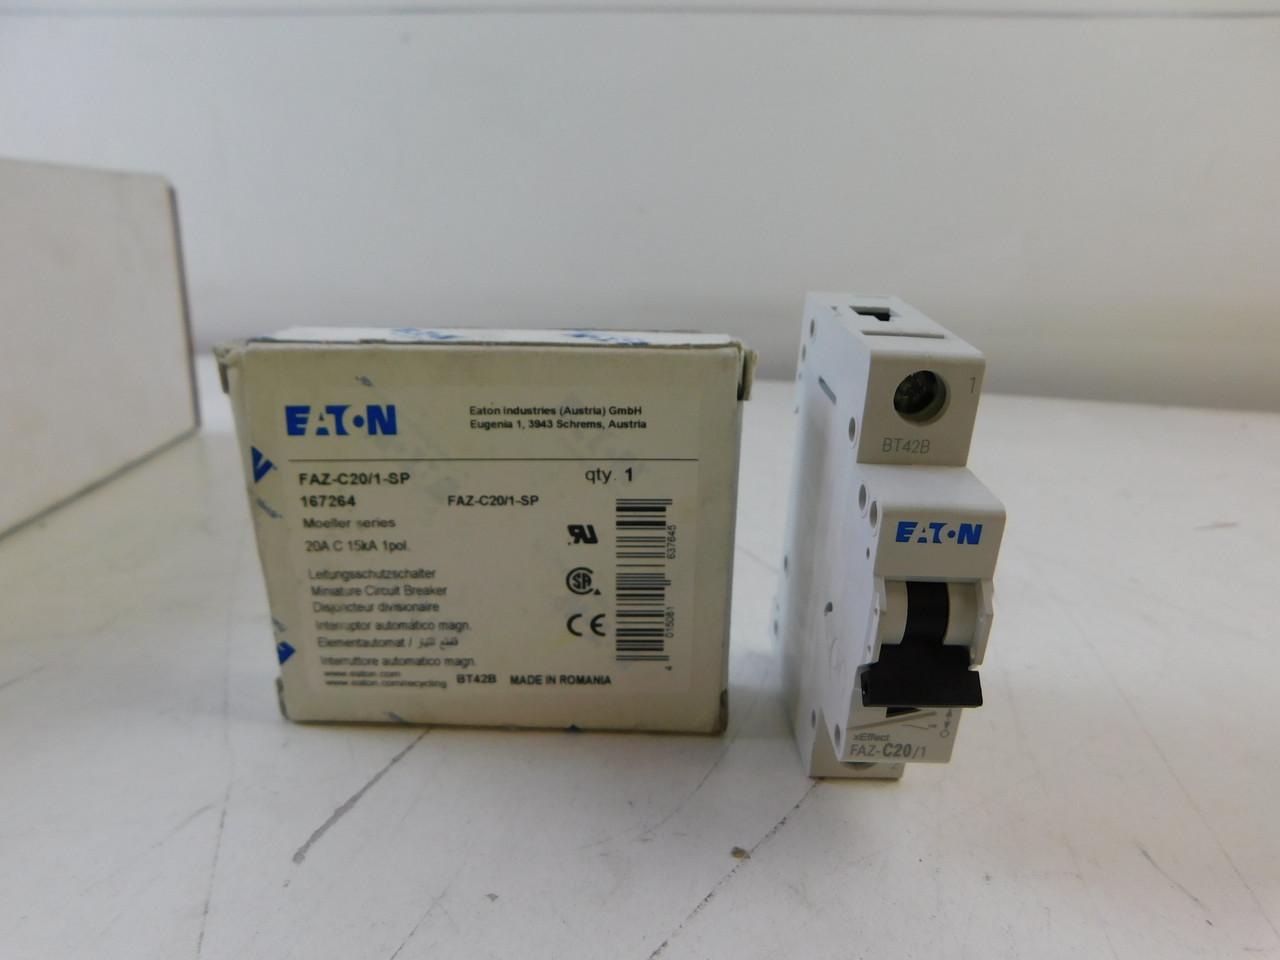 Eaton FAZ-C20/1-SP Eaton FAZ supplementary protector,UL 1077 Industrial miniature circuit breaker-supplementary protector,Single package,Medium levels of inrush current are expected,20A,15 kAIC,Single-pole,277 V,5-10X/n,Q38,50-60 Hz,Standard terminals,C Curve